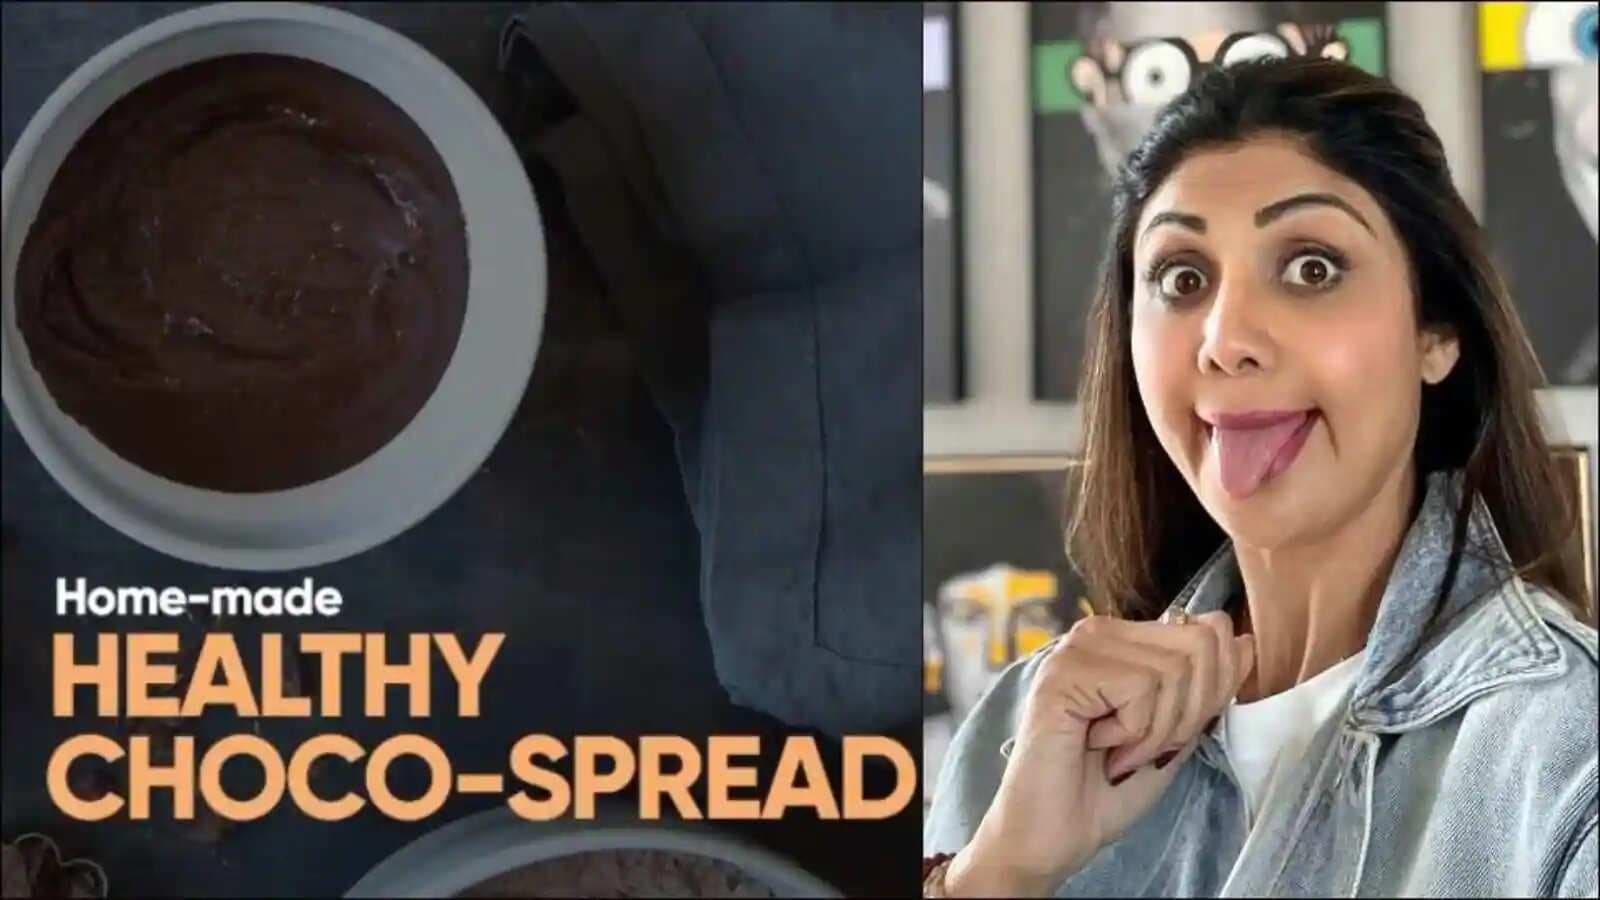 Recipe: Shilpa Shetty makes us drool with healthy homemade spin to choco-spread